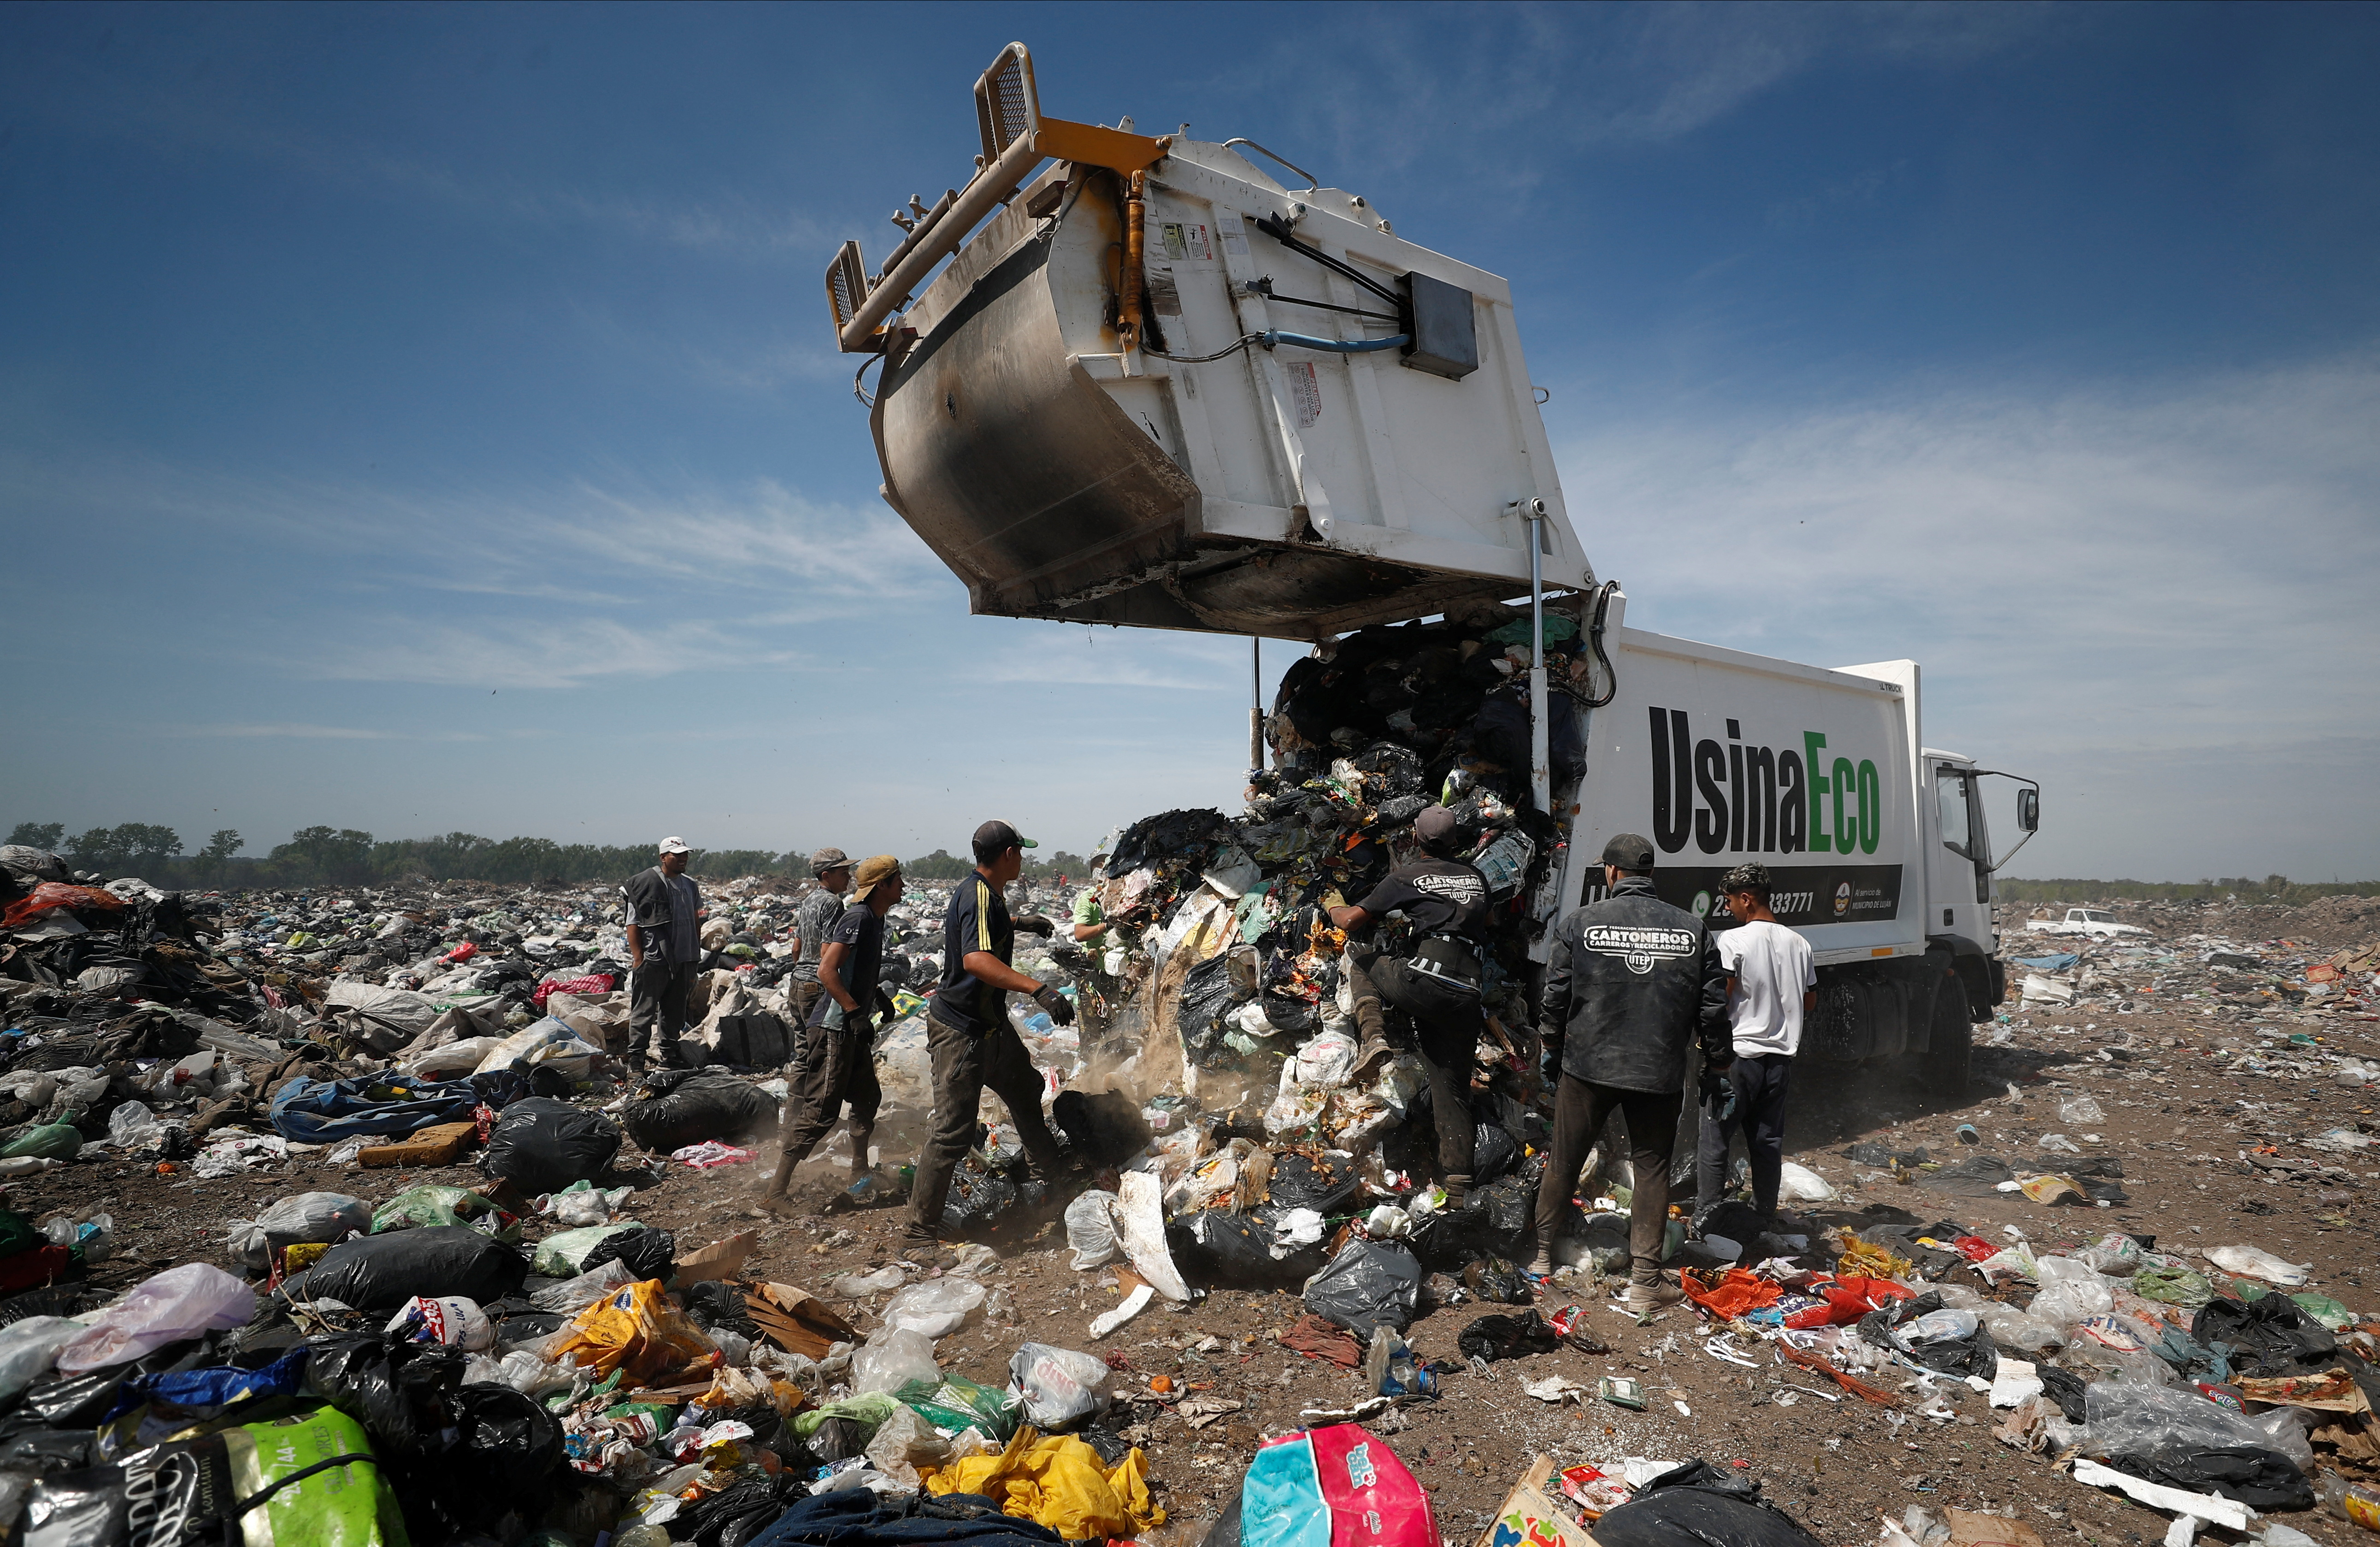 Barter clubs and rubbish dumps: poor Argentines feel the pain of 100% inflation